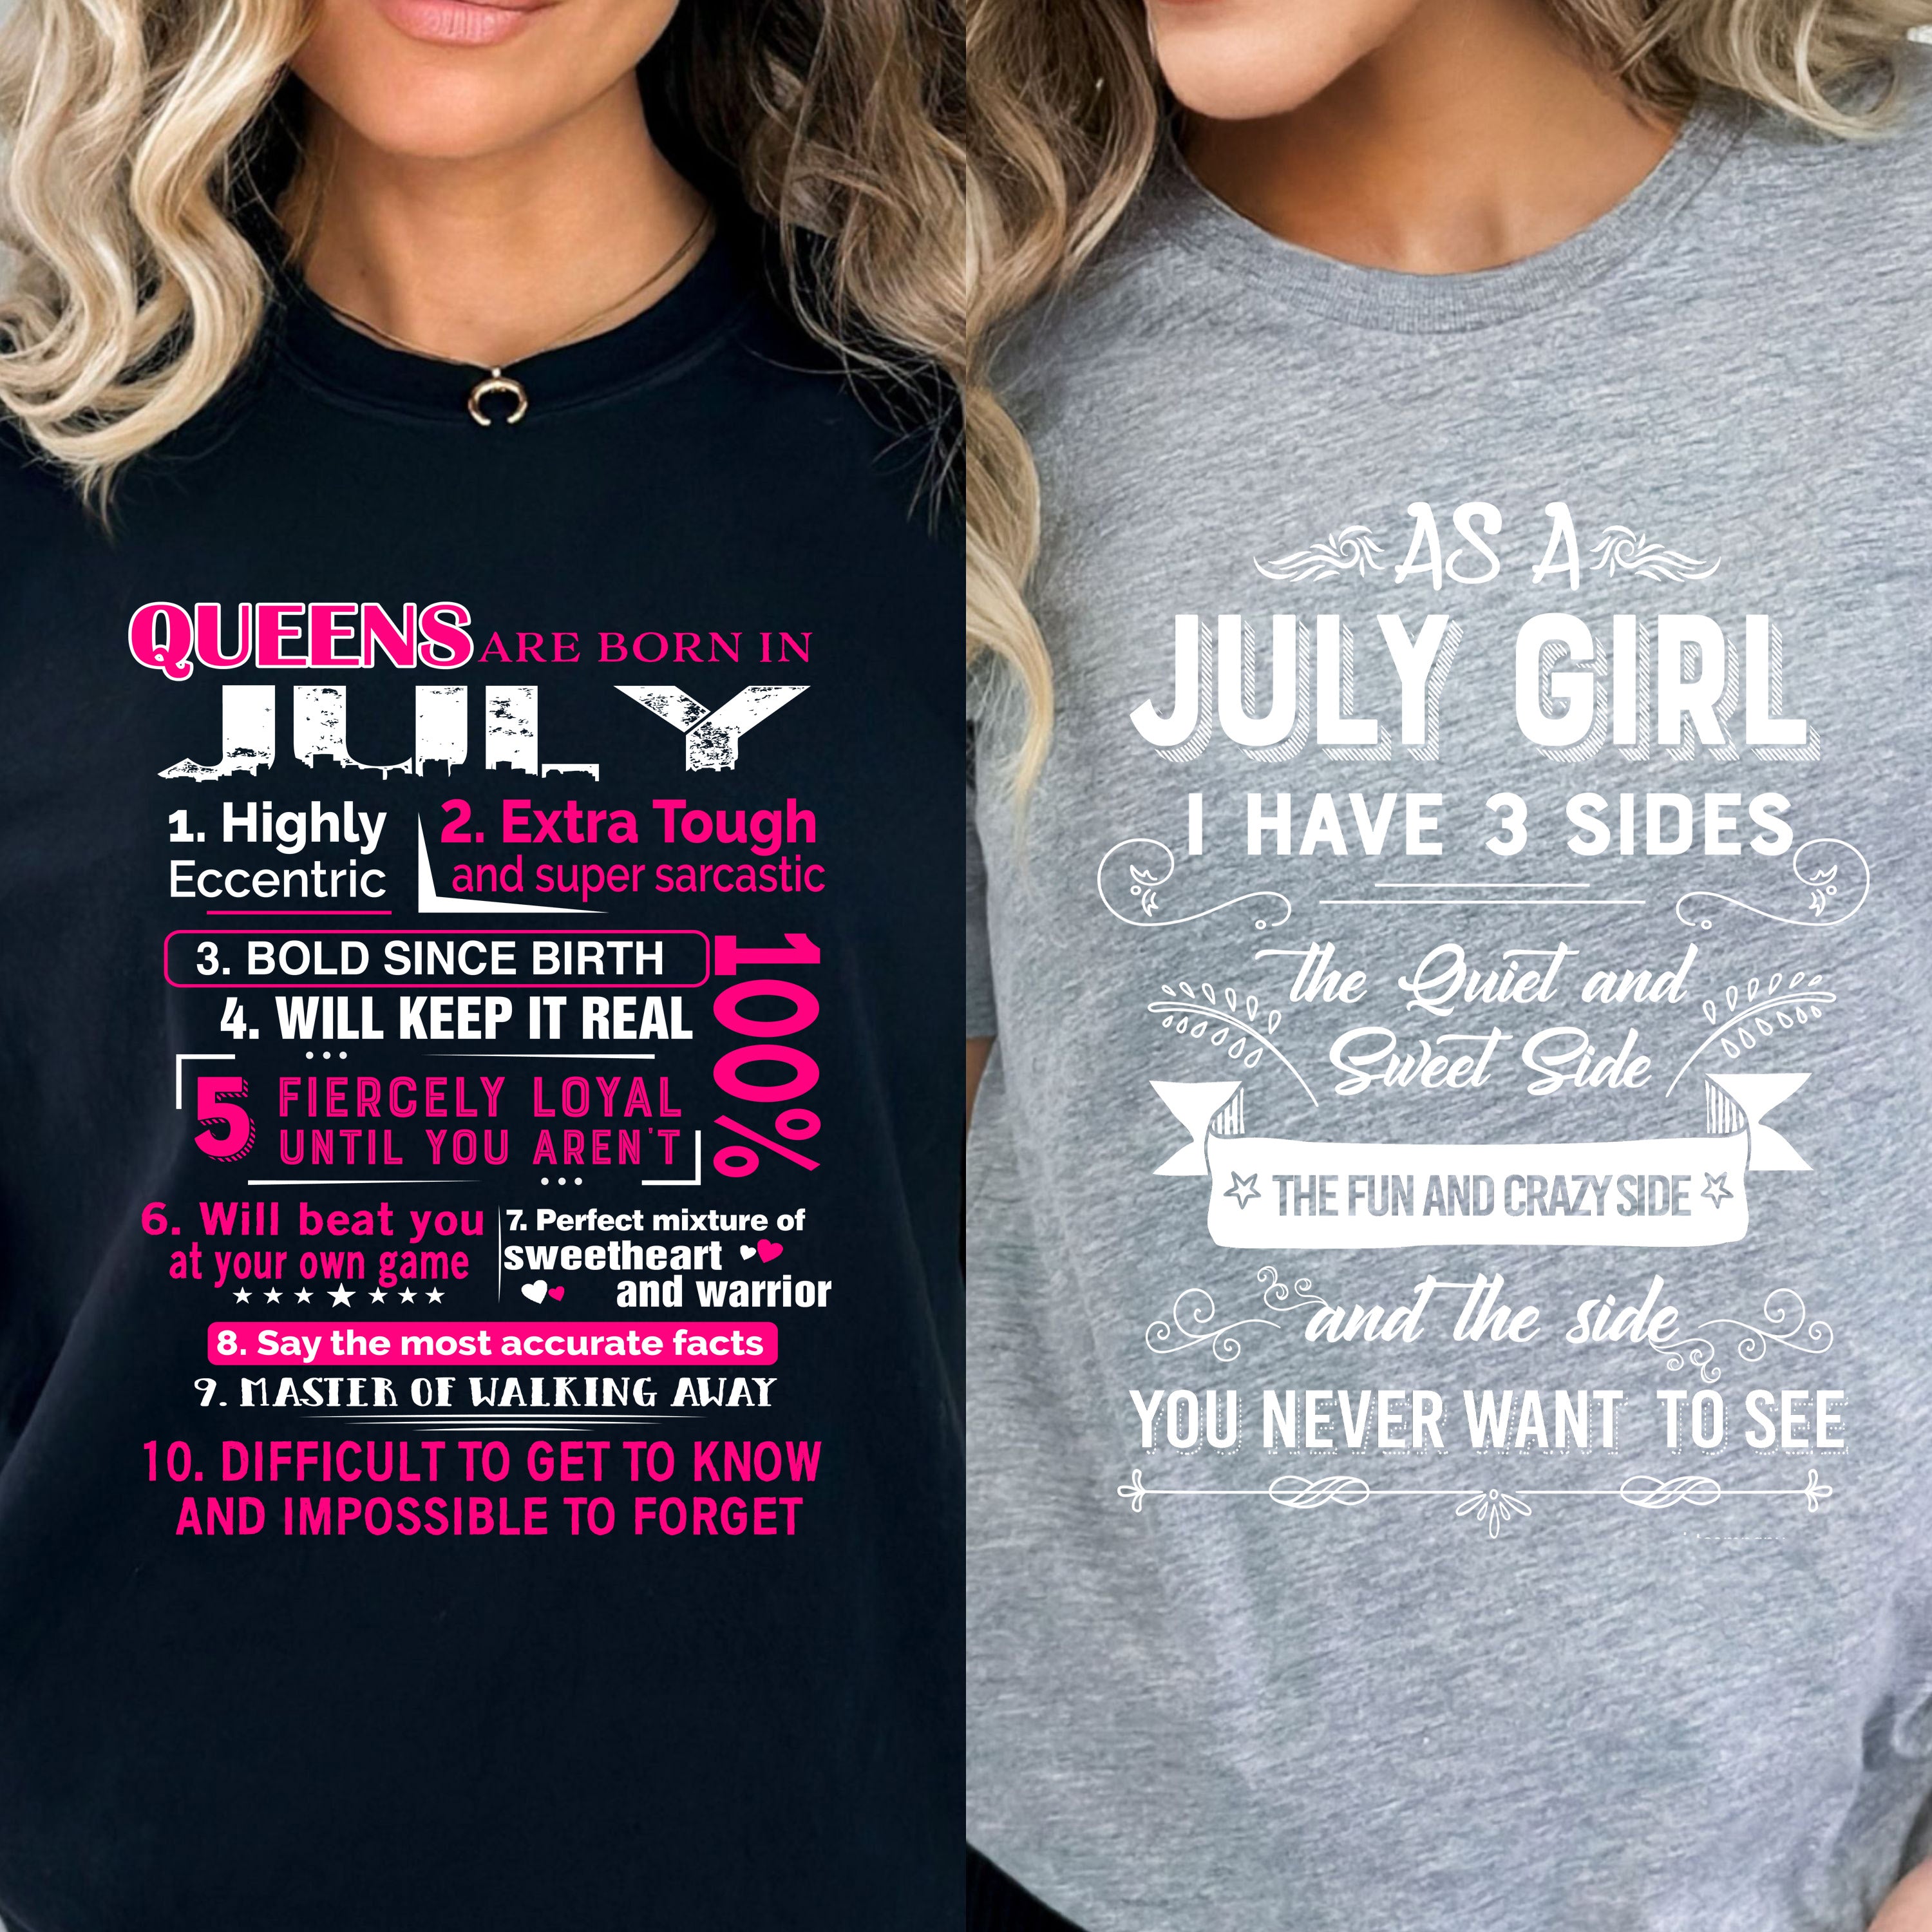 "July Queens +3 Sides-Pack of 2",T-Shirt.